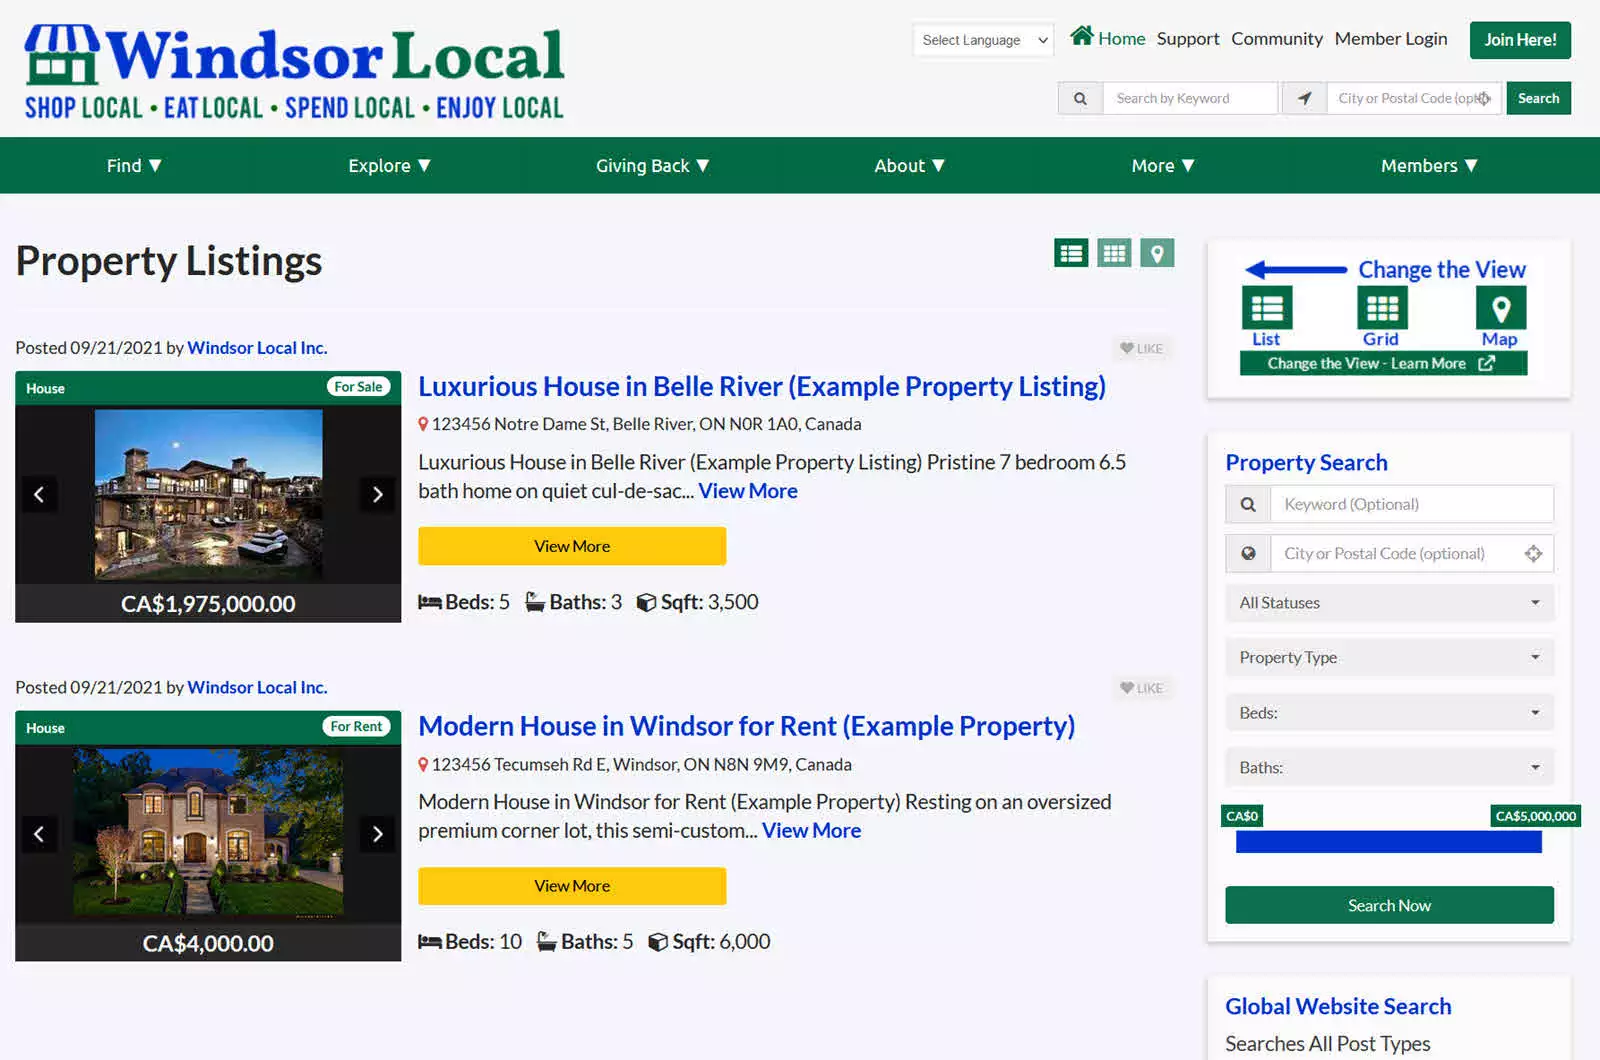 Windsor Local Property Search Summary Results view